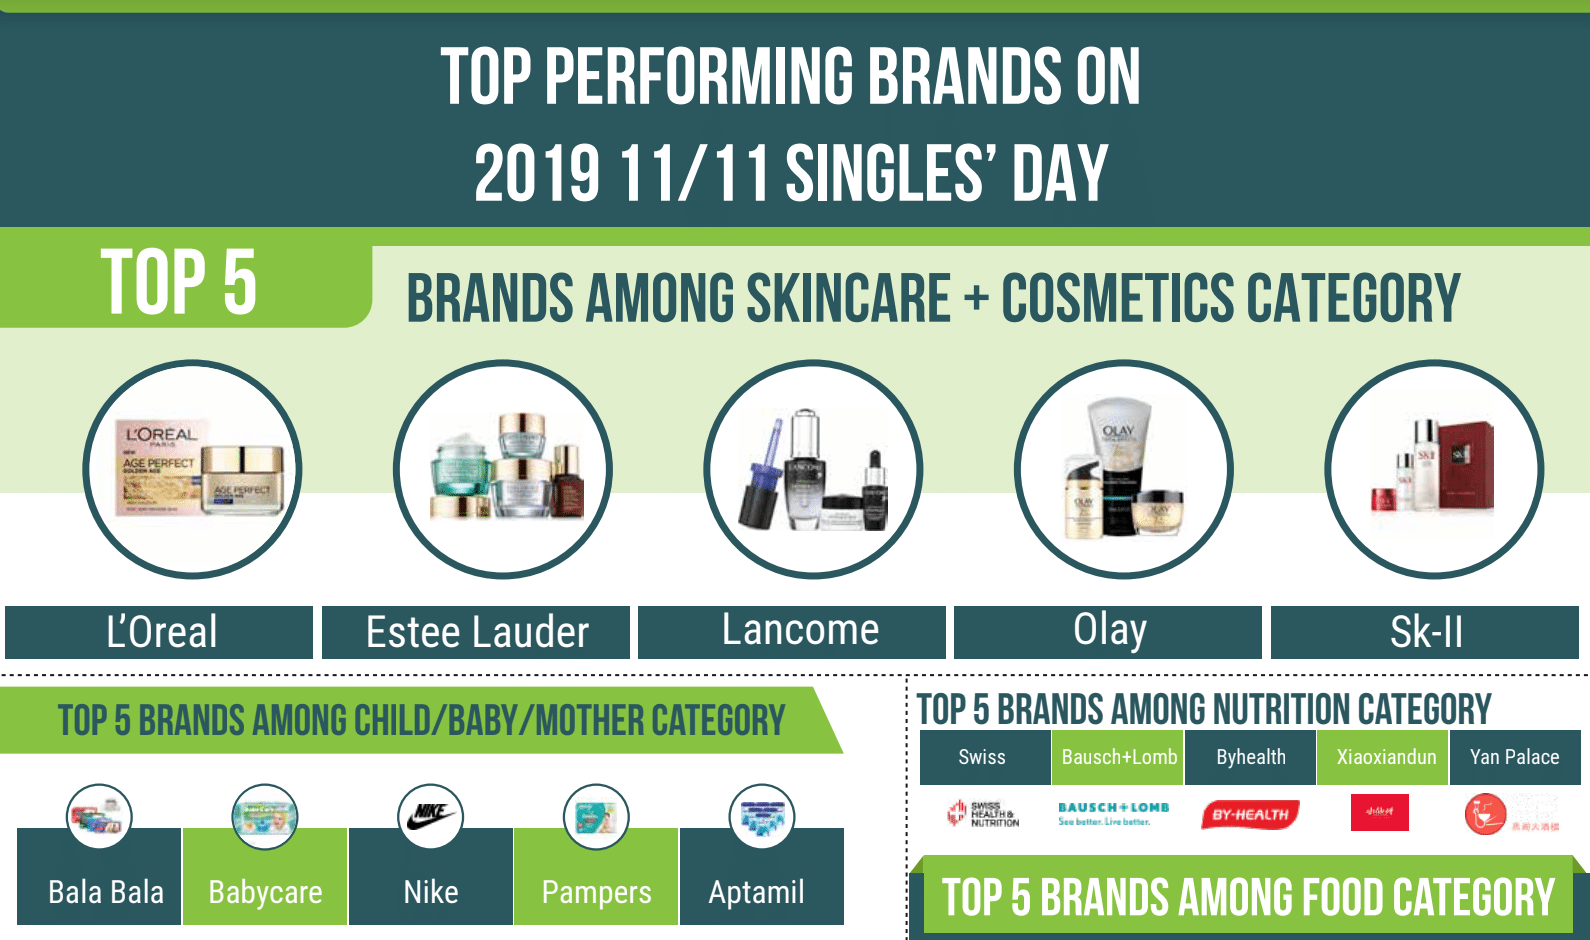 Top performing brands on 2019 11/11 Singles’ Day